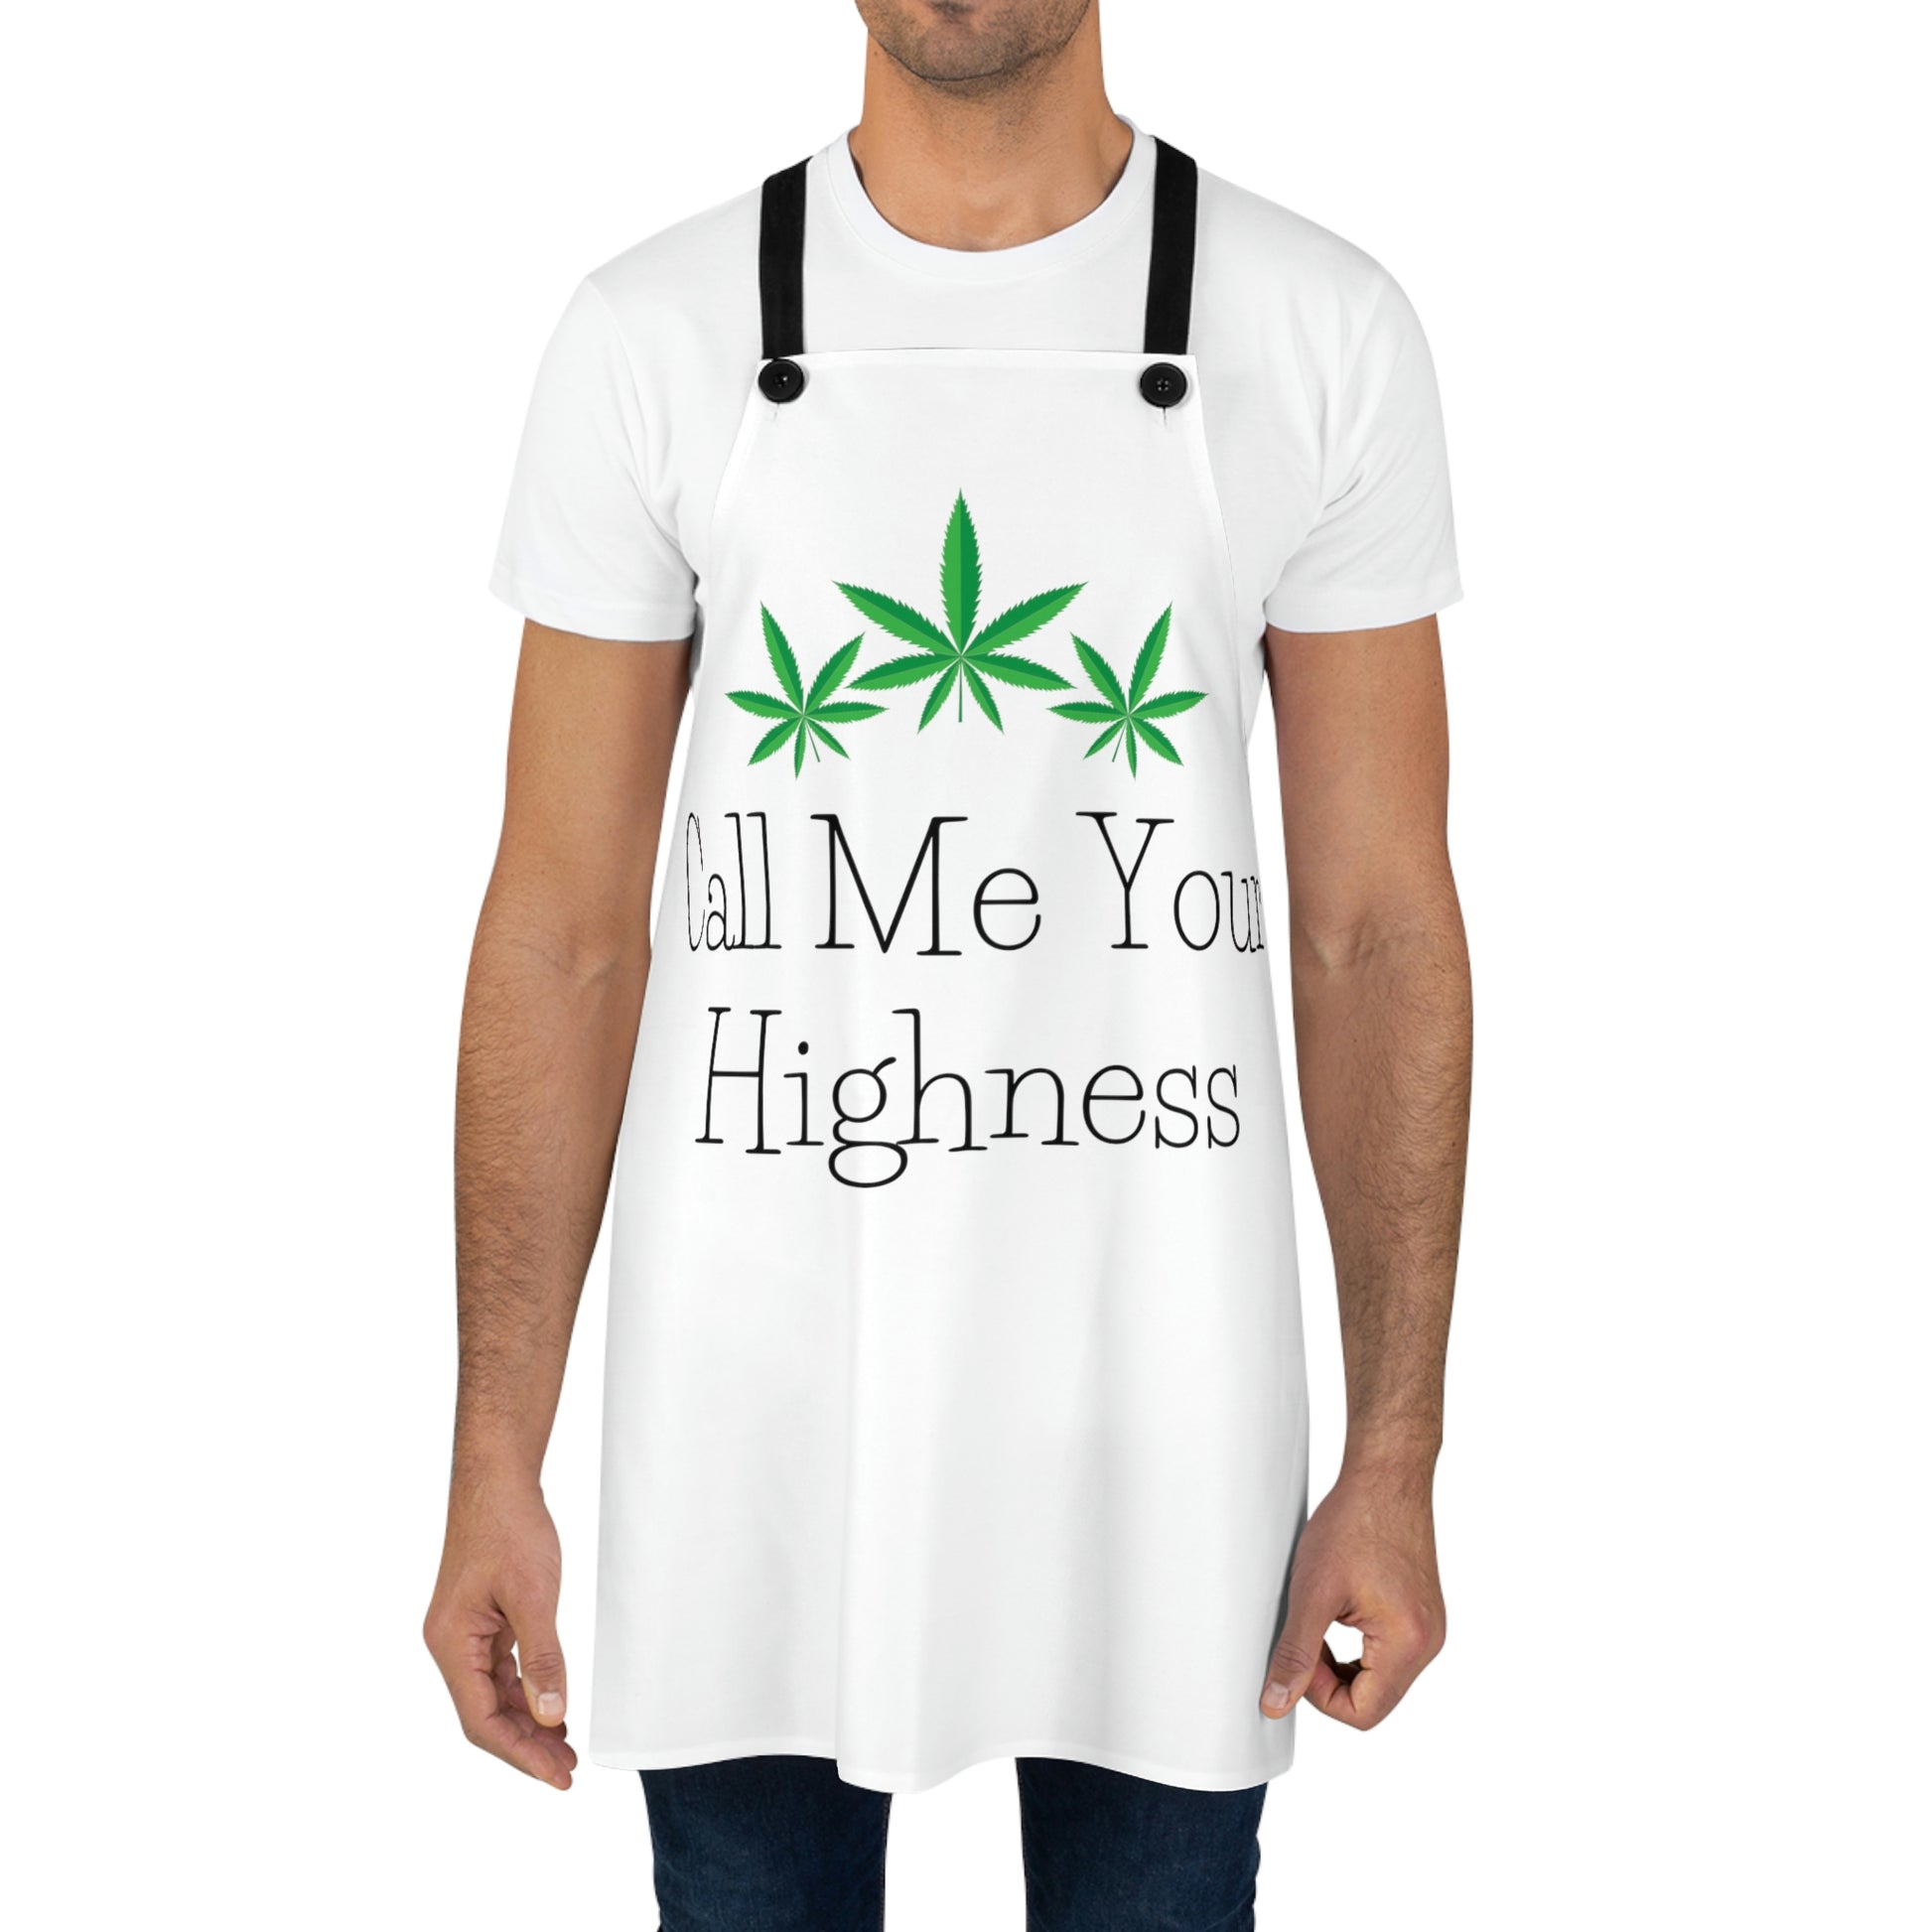 Man in the Call Me Your Highness Cannabis Chef's Apron with green cannabis leaves 